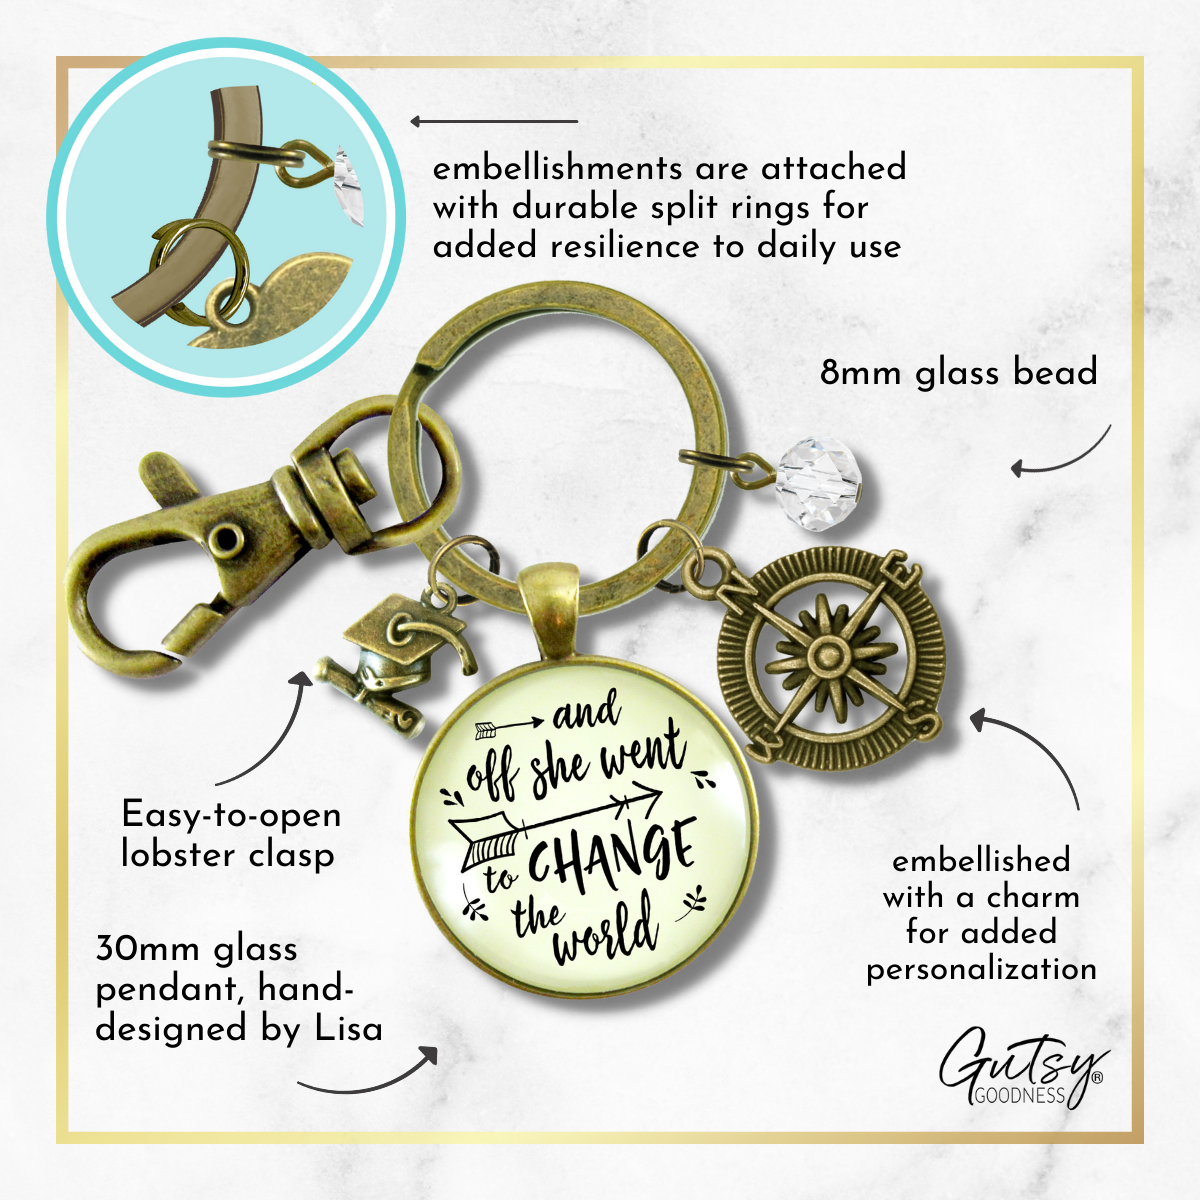 And Off She Went to Change the World Graduation Keychain Compass Charm Womens Jewelry - Gutsy Goodness Handmade Jewelry;And Off She Went To Change The World Graduation Keychain Compass Charm Womens Jewelry - Gutsy Goodness Handmade Jewelry Gifts